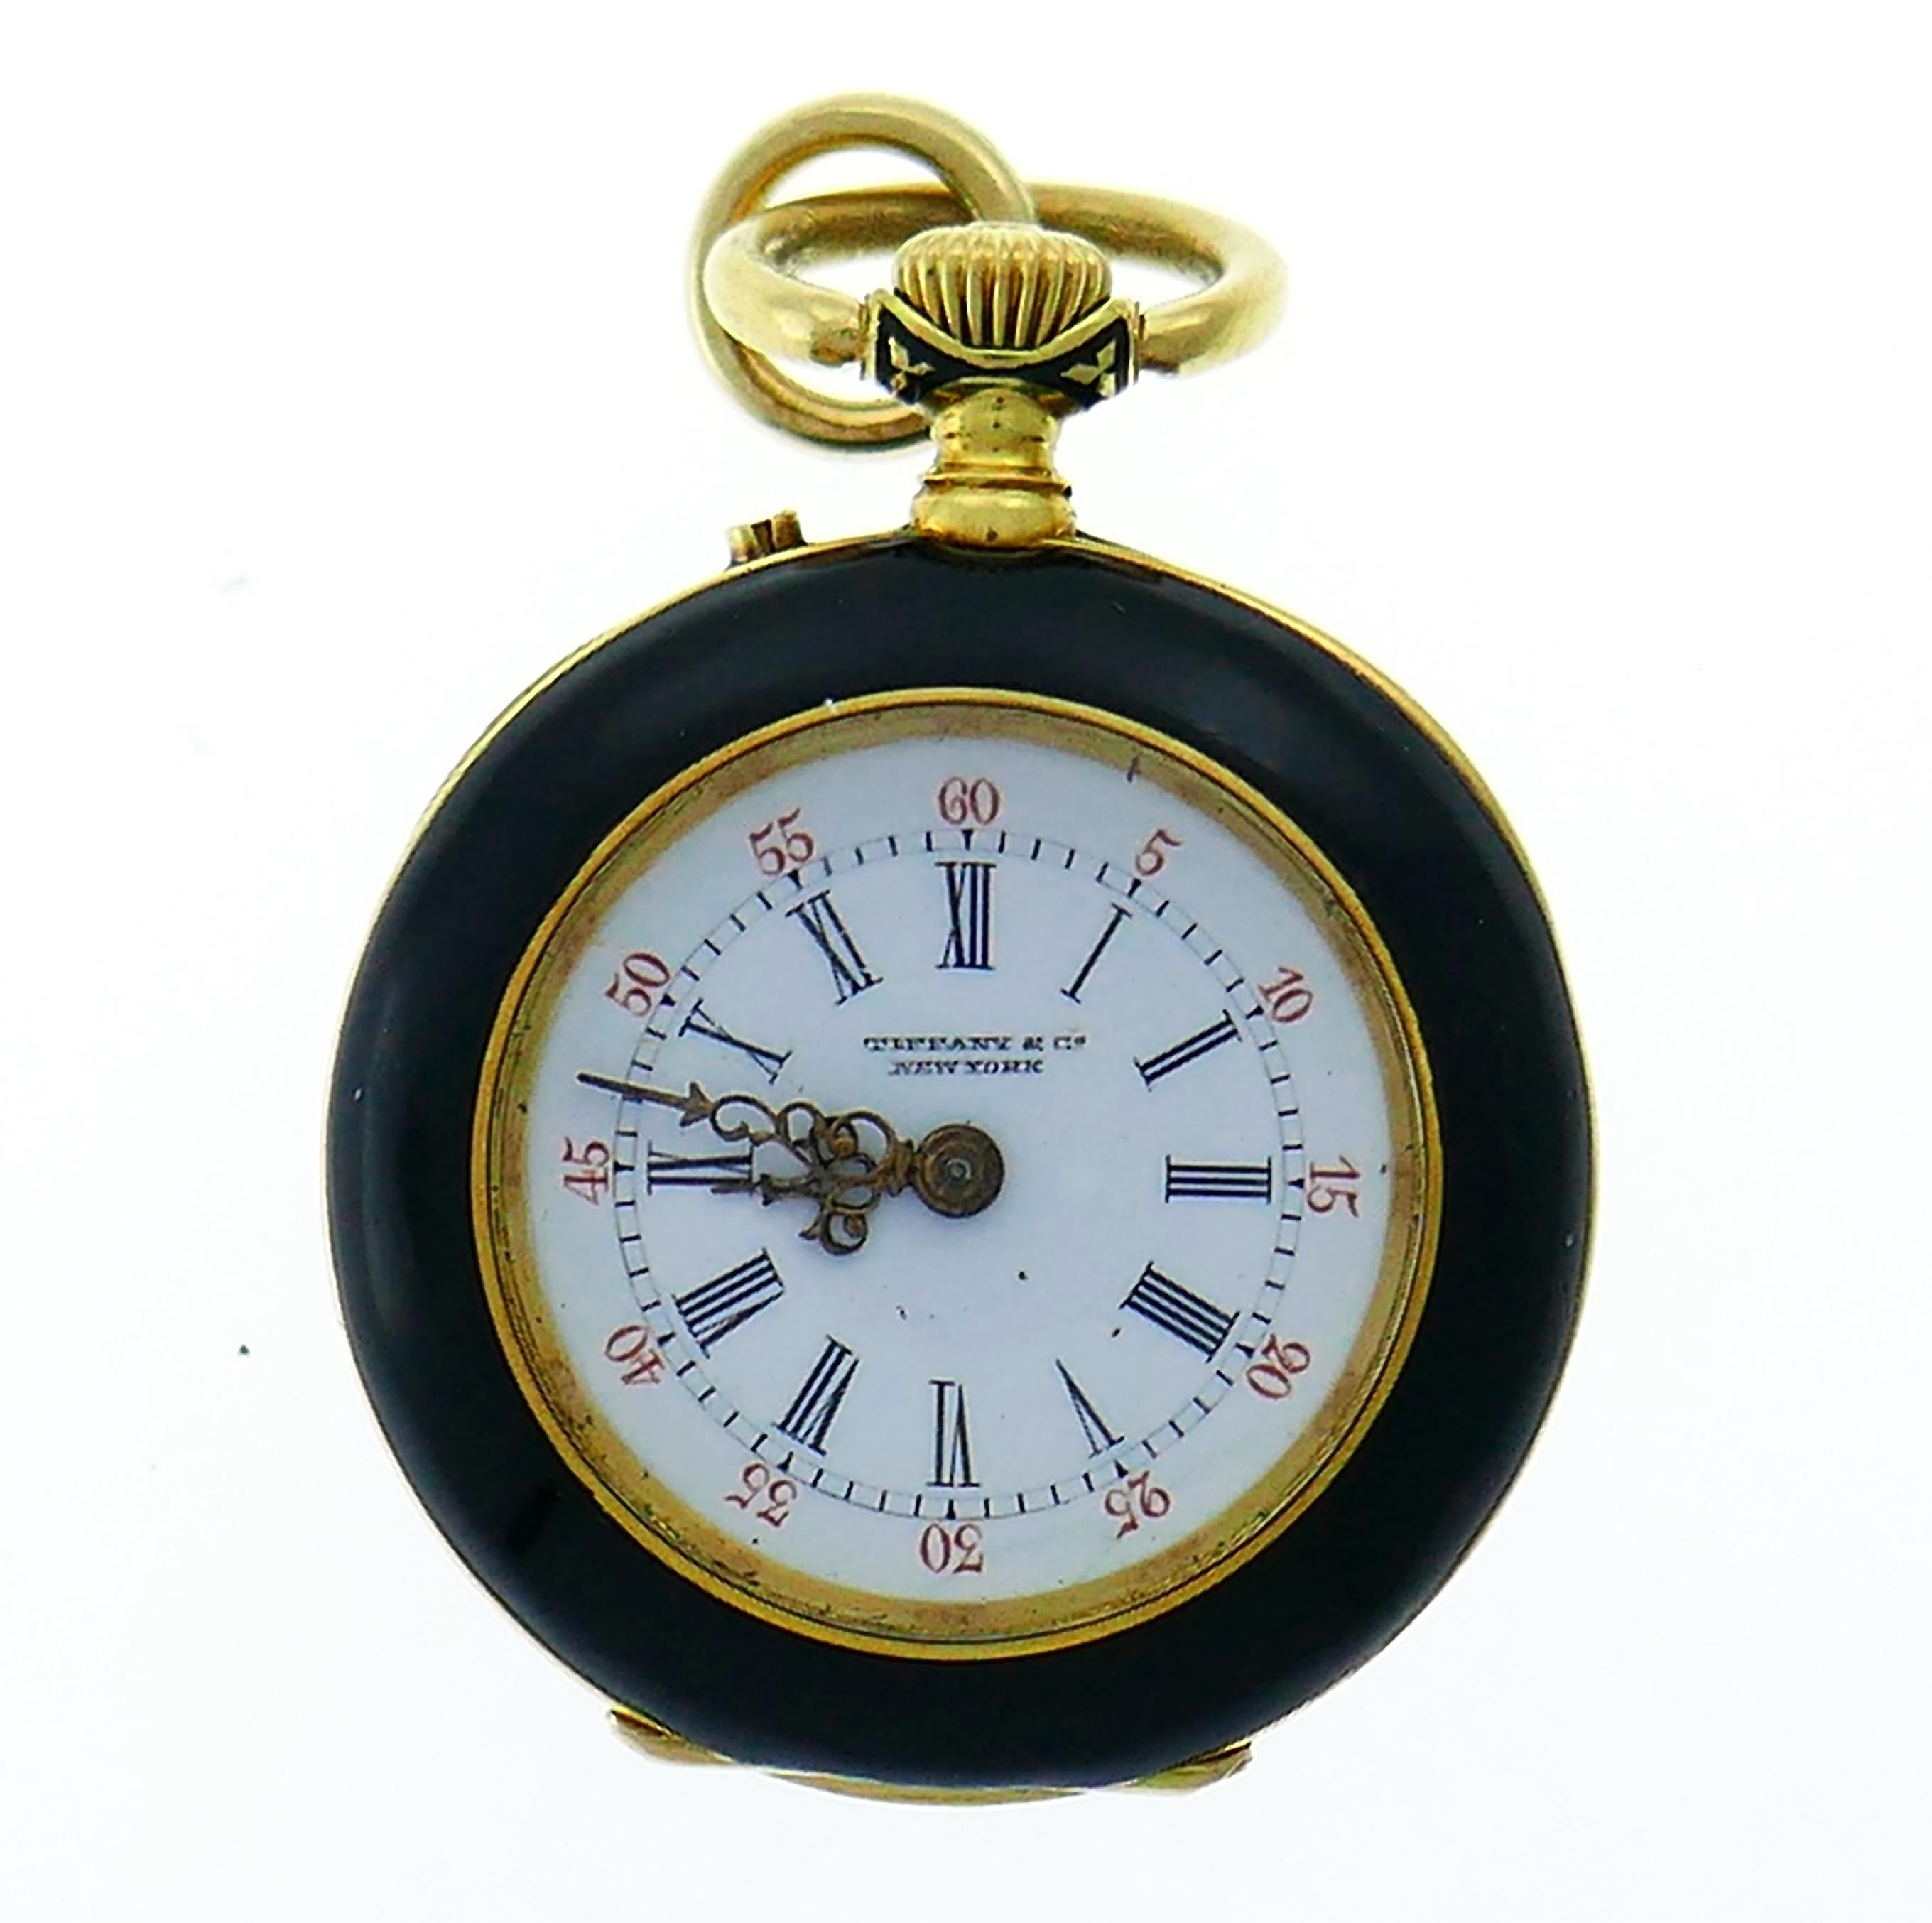 Rare Tiffany & Co. pocket watch that would be definitely a conversational piece. It was created in in the end of 1880s - beginning of 1890s. Made of 18 karat (stamped) yellow gold, black enamel and set with an Old European cut diamond (approximately